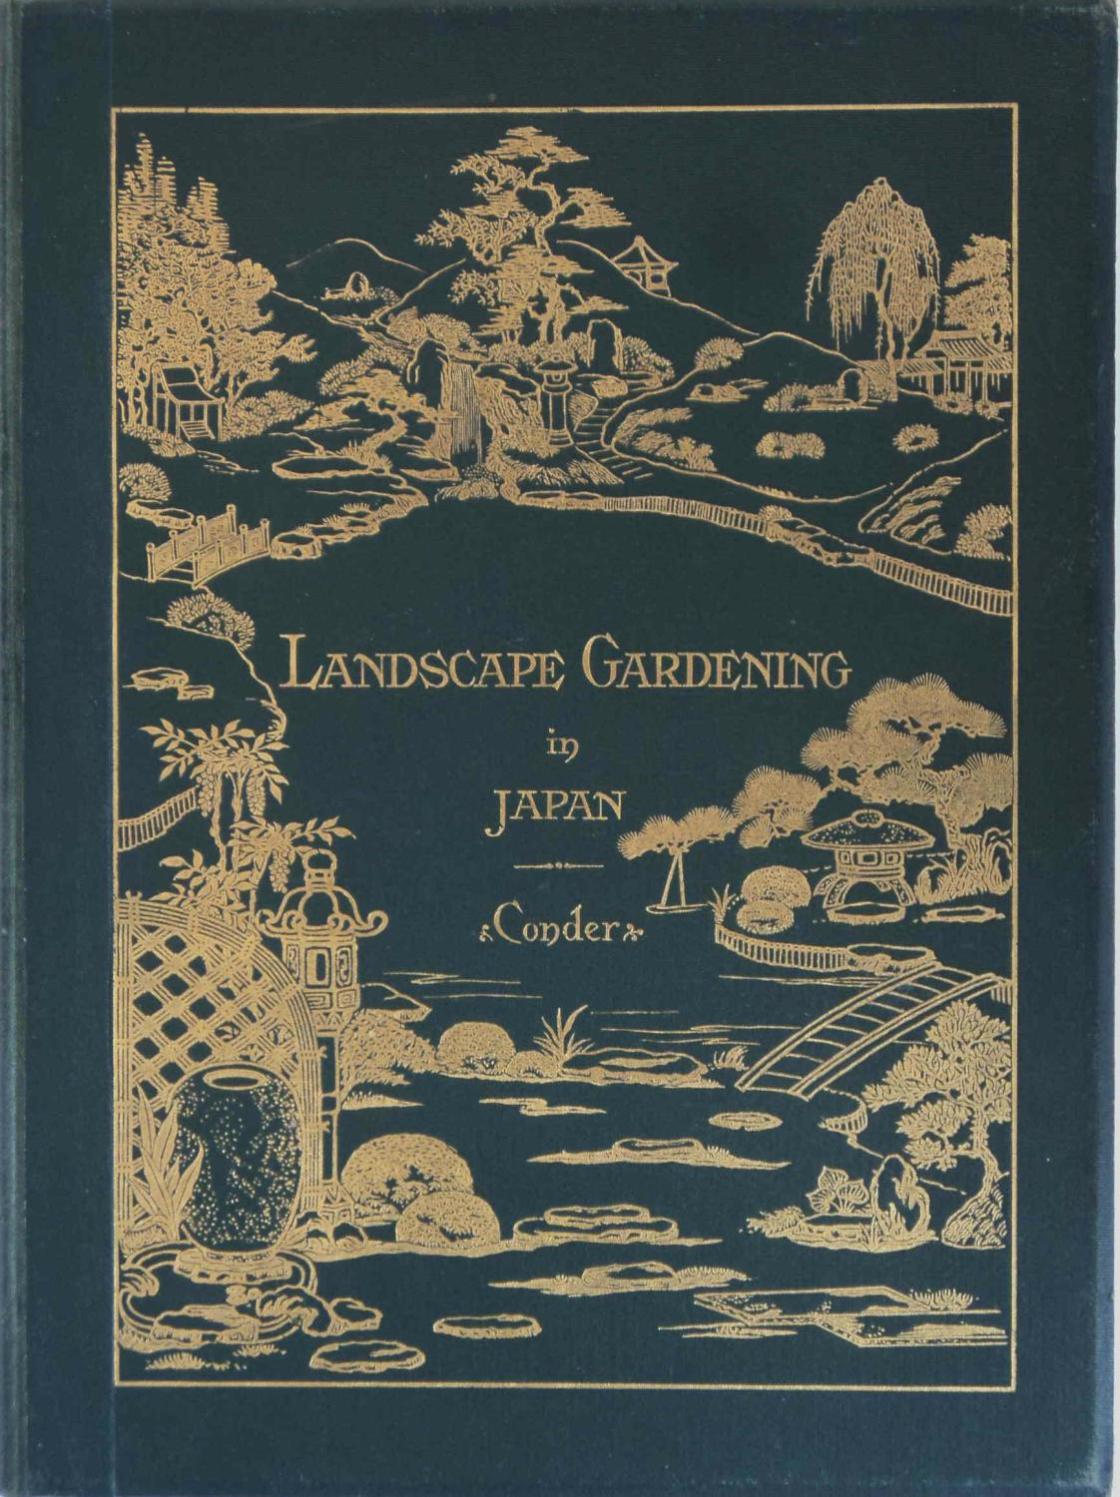 Photograph of the cover of "Landscape Gardening in Japan," 1912 edition.